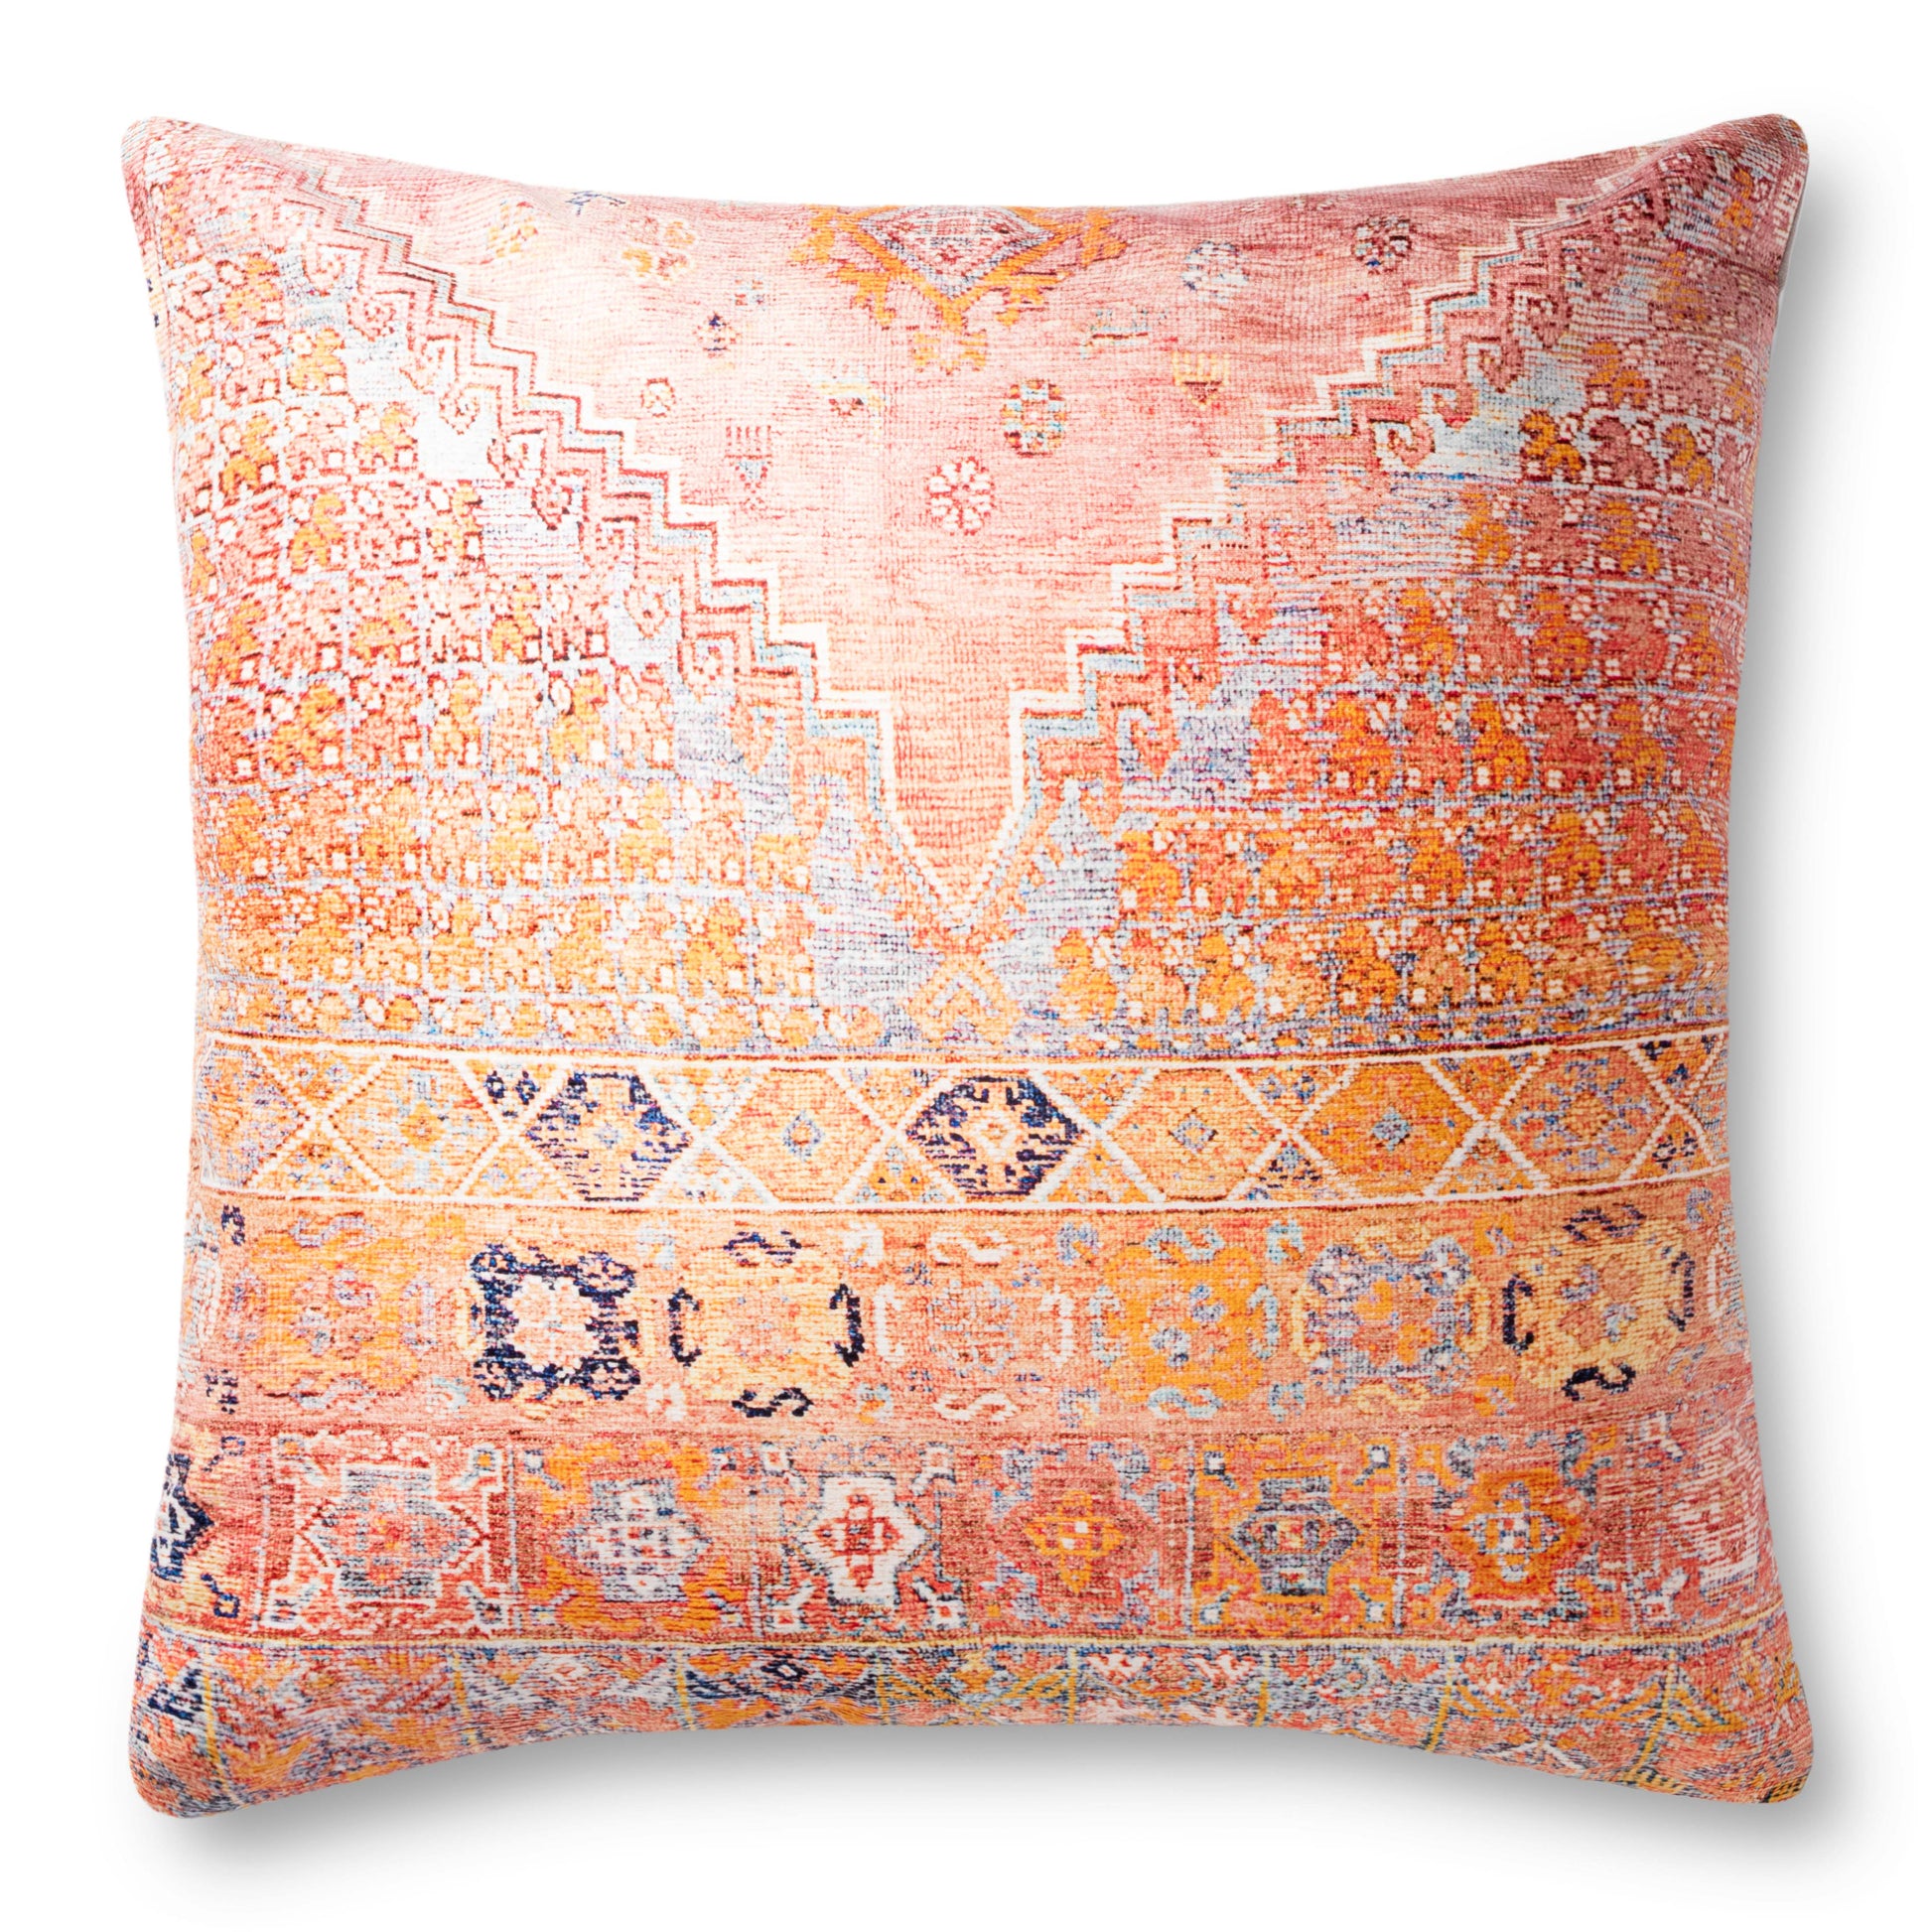 Photo of a pillow;  P0885 Coral / Multi 3' x 3' Pillow